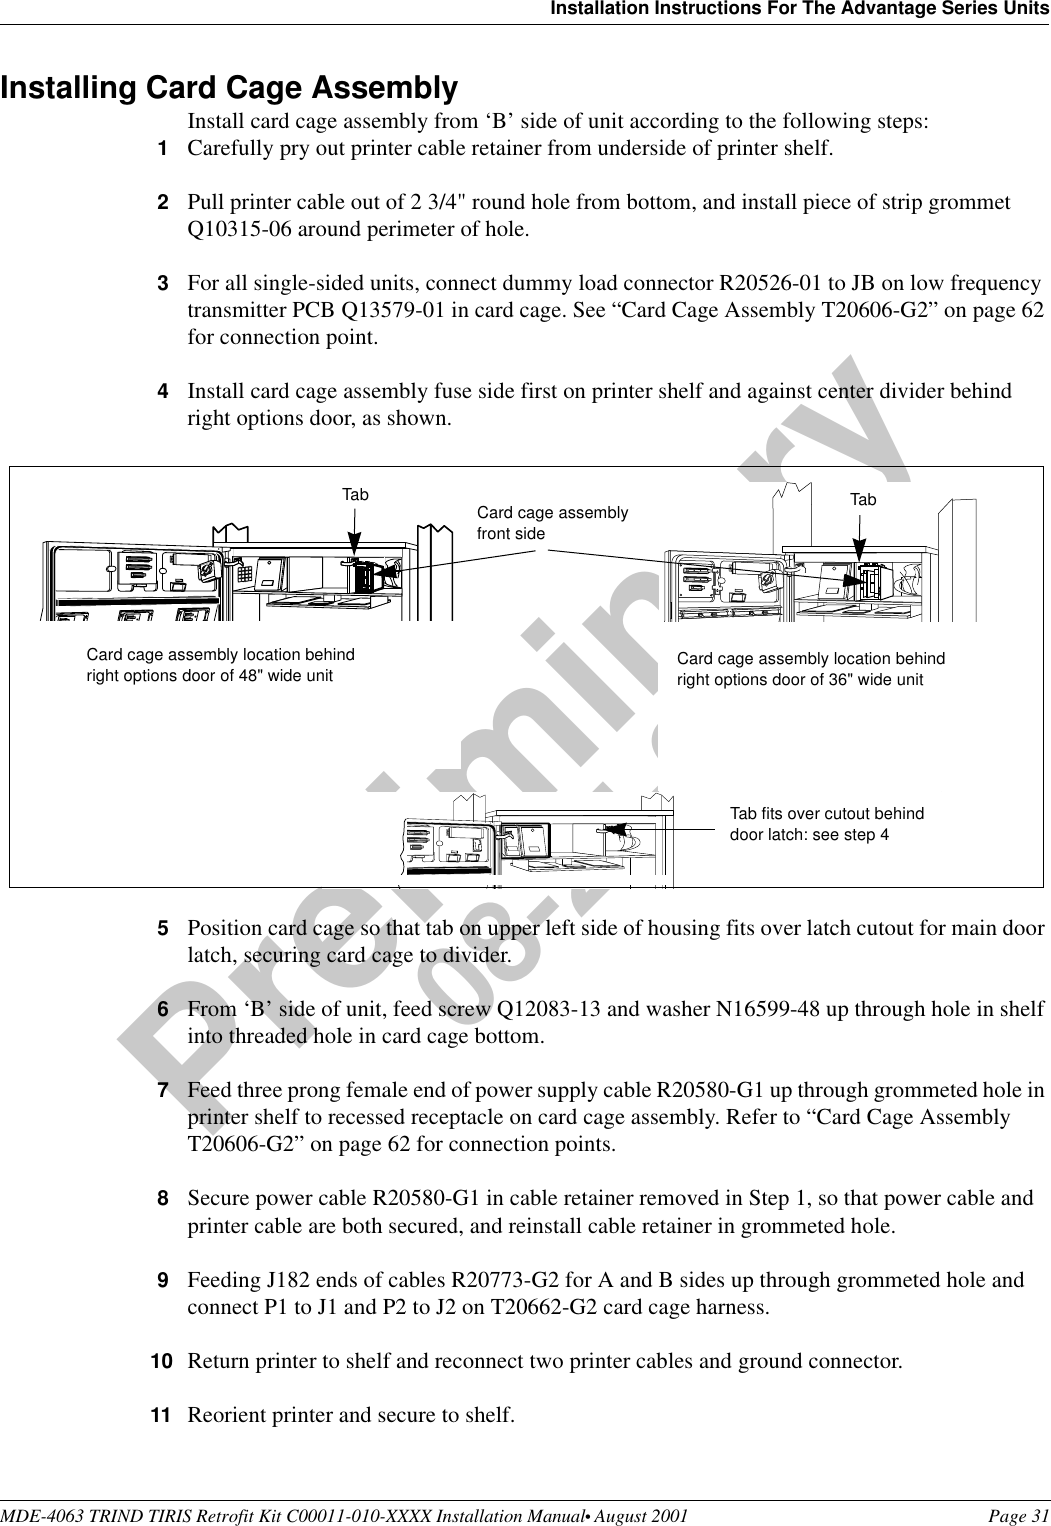 MDE-4063 TRIND TIRIS Retrofit Kit C00011-010-XXXX Installation Manual• August 2001 Page 31Installation Instructions For The Advantage Series UnitsPreliminary08-24-01Installing Card Cage AssemblyInstall card cage assembly from ‘B’ side of unit according to the following steps:1Carefully pry out printer cable retainer from underside of printer shelf.2Pull printer cable out of 2 3/4&quot; round hole from bottom, and install piece of strip grommet Q10315-06 around perimeter of hole.3For all single-sided units, connect dummy load connector R20526-01 to JB on low frequency transmitter PCB Q13579-01 in card cage. See “Card Cage Assembly T20606-G2” on page 62 for connection point.4Install card cage assembly fuse side first on printer shelf and against center divider behind right options door, as shown.5Position card cage so that tab on upper left side of housing fits over latch cutout for main door latch, securing card cage to divider.6From ‘B’ side of unit, feed screw Q12083-13 and washer N16599-48 up through hole in shelf into threaded hole in card cage bottom.7Feed three prong female end of power supply cable R20580-G1 up through grommeted hole in printer shelf to recessed receptacle on card cage assembly. Refer to “Card Cage Assembly T20606-G2” on page 62 for connection points.8Secure power cable R20580-G1 in cable retainer removed in Step 1, so that power cable and printer cable are both secured, and reinstall cable retainer in grommeted hole. 9Feeding J182 ends of cables R20773-G2 for A and B sides up through grommeted hole and connect P1 to J1 and P2 to J2 on T20662-G2 card cage harness. 10 Return printer to shelf and reconnect two printer cables and ground connector.11 Reorient printer and secure to shelf.Tab Card cage assemblyfront sideTab fits over cutout behind door latch: see step 4Card cage assembly location behind right options door of 36&quot; wide unitCard cage assembly location behind right options door of 48&quot; wide unitTab